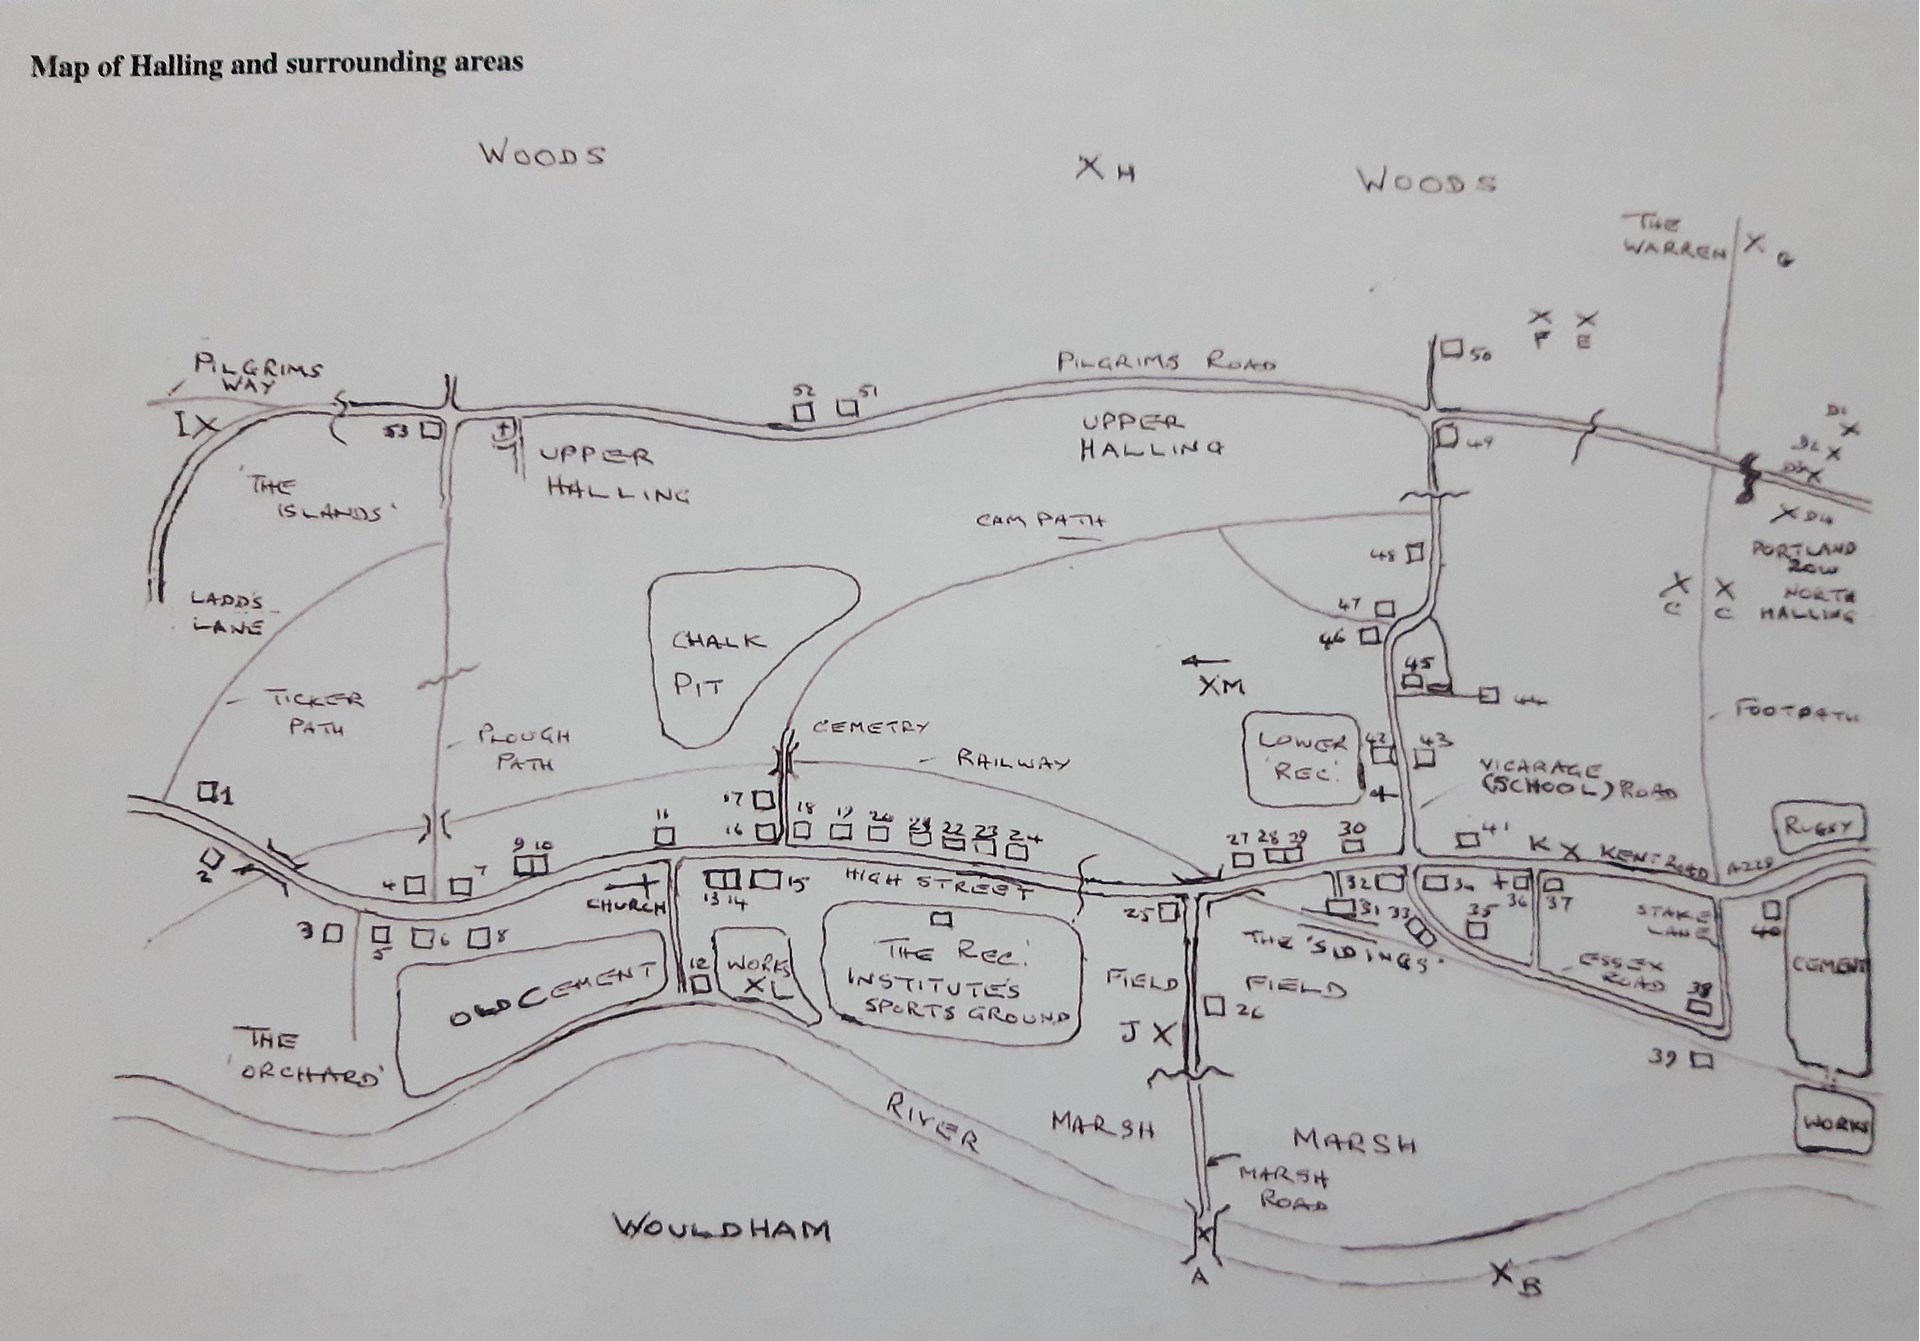 Ron Underdown's map of 1940's Halling